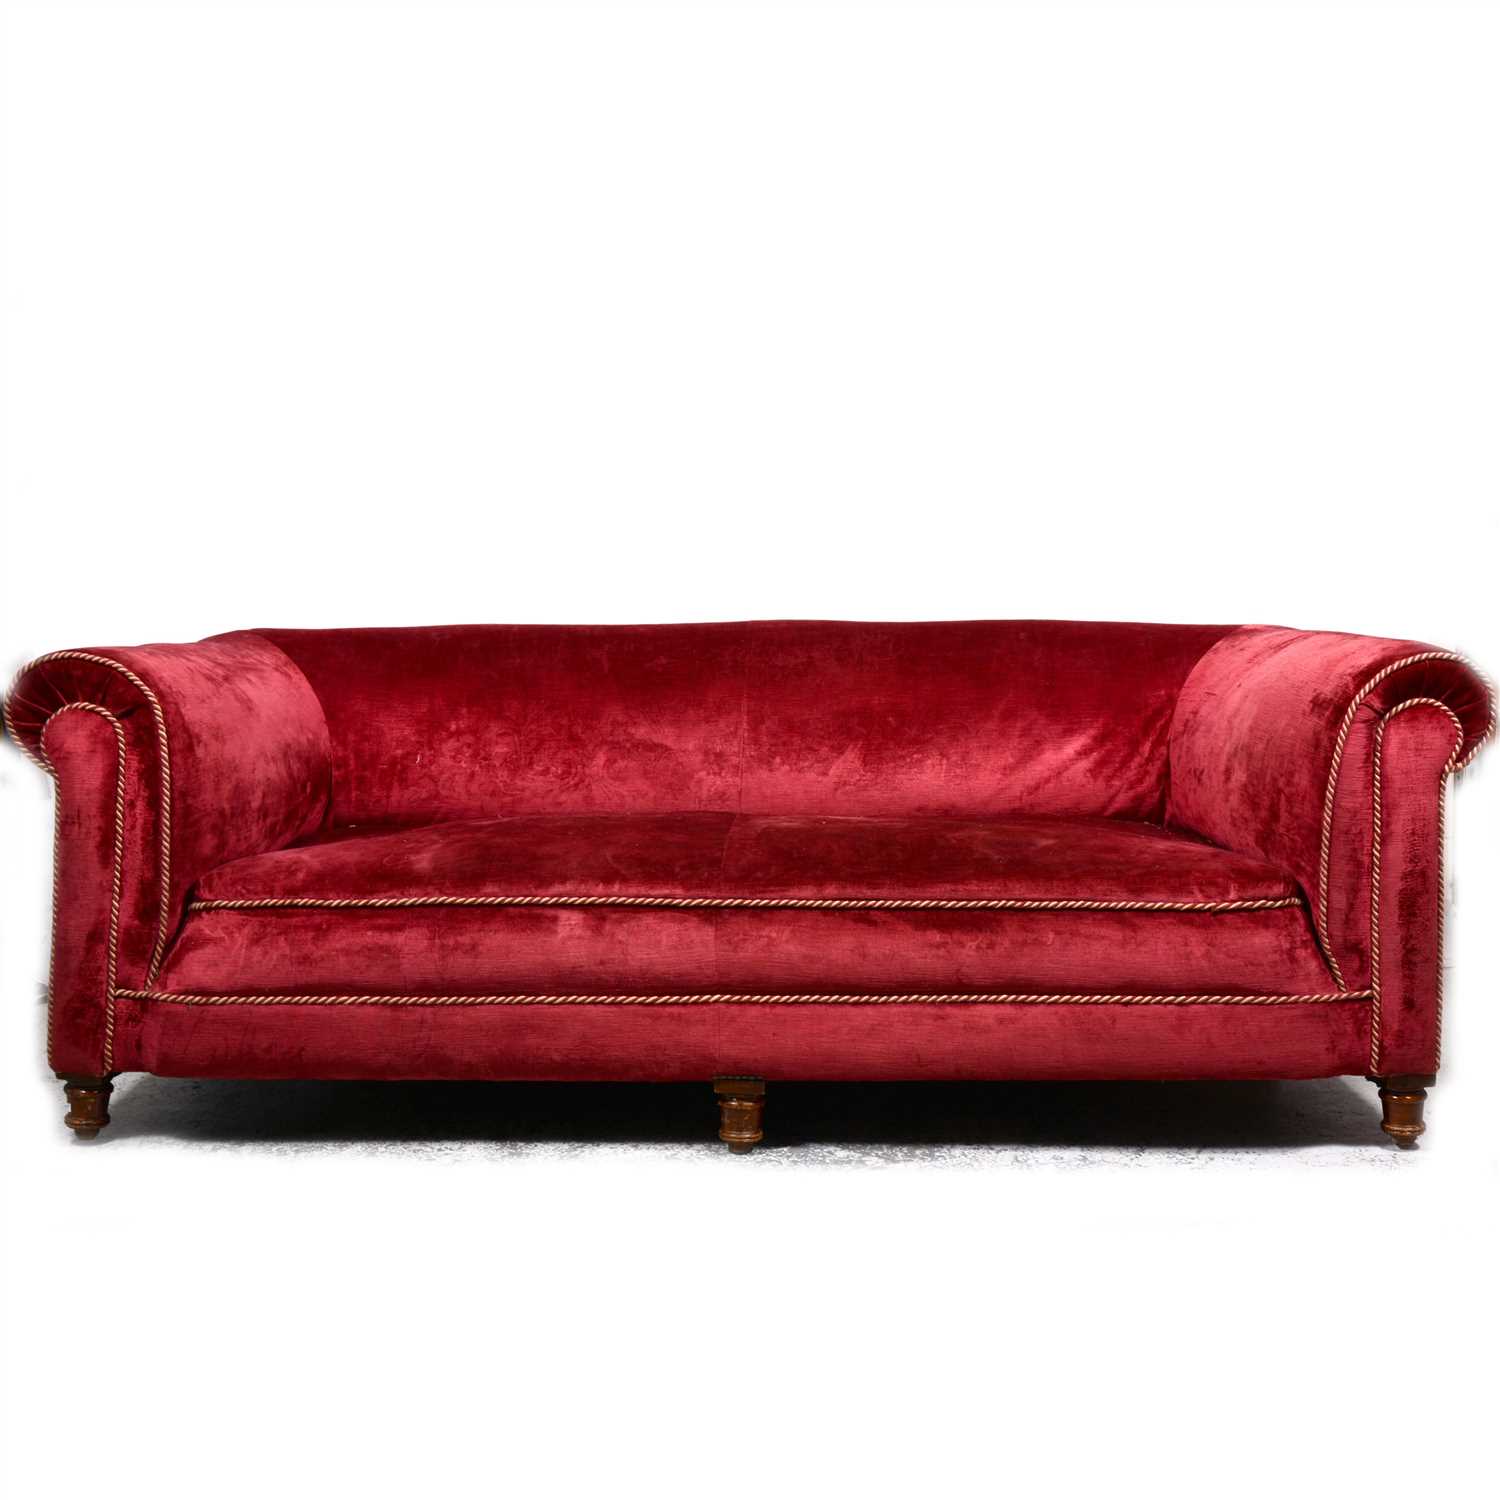 Lot 577 - Victorian sofa, red upholstery.